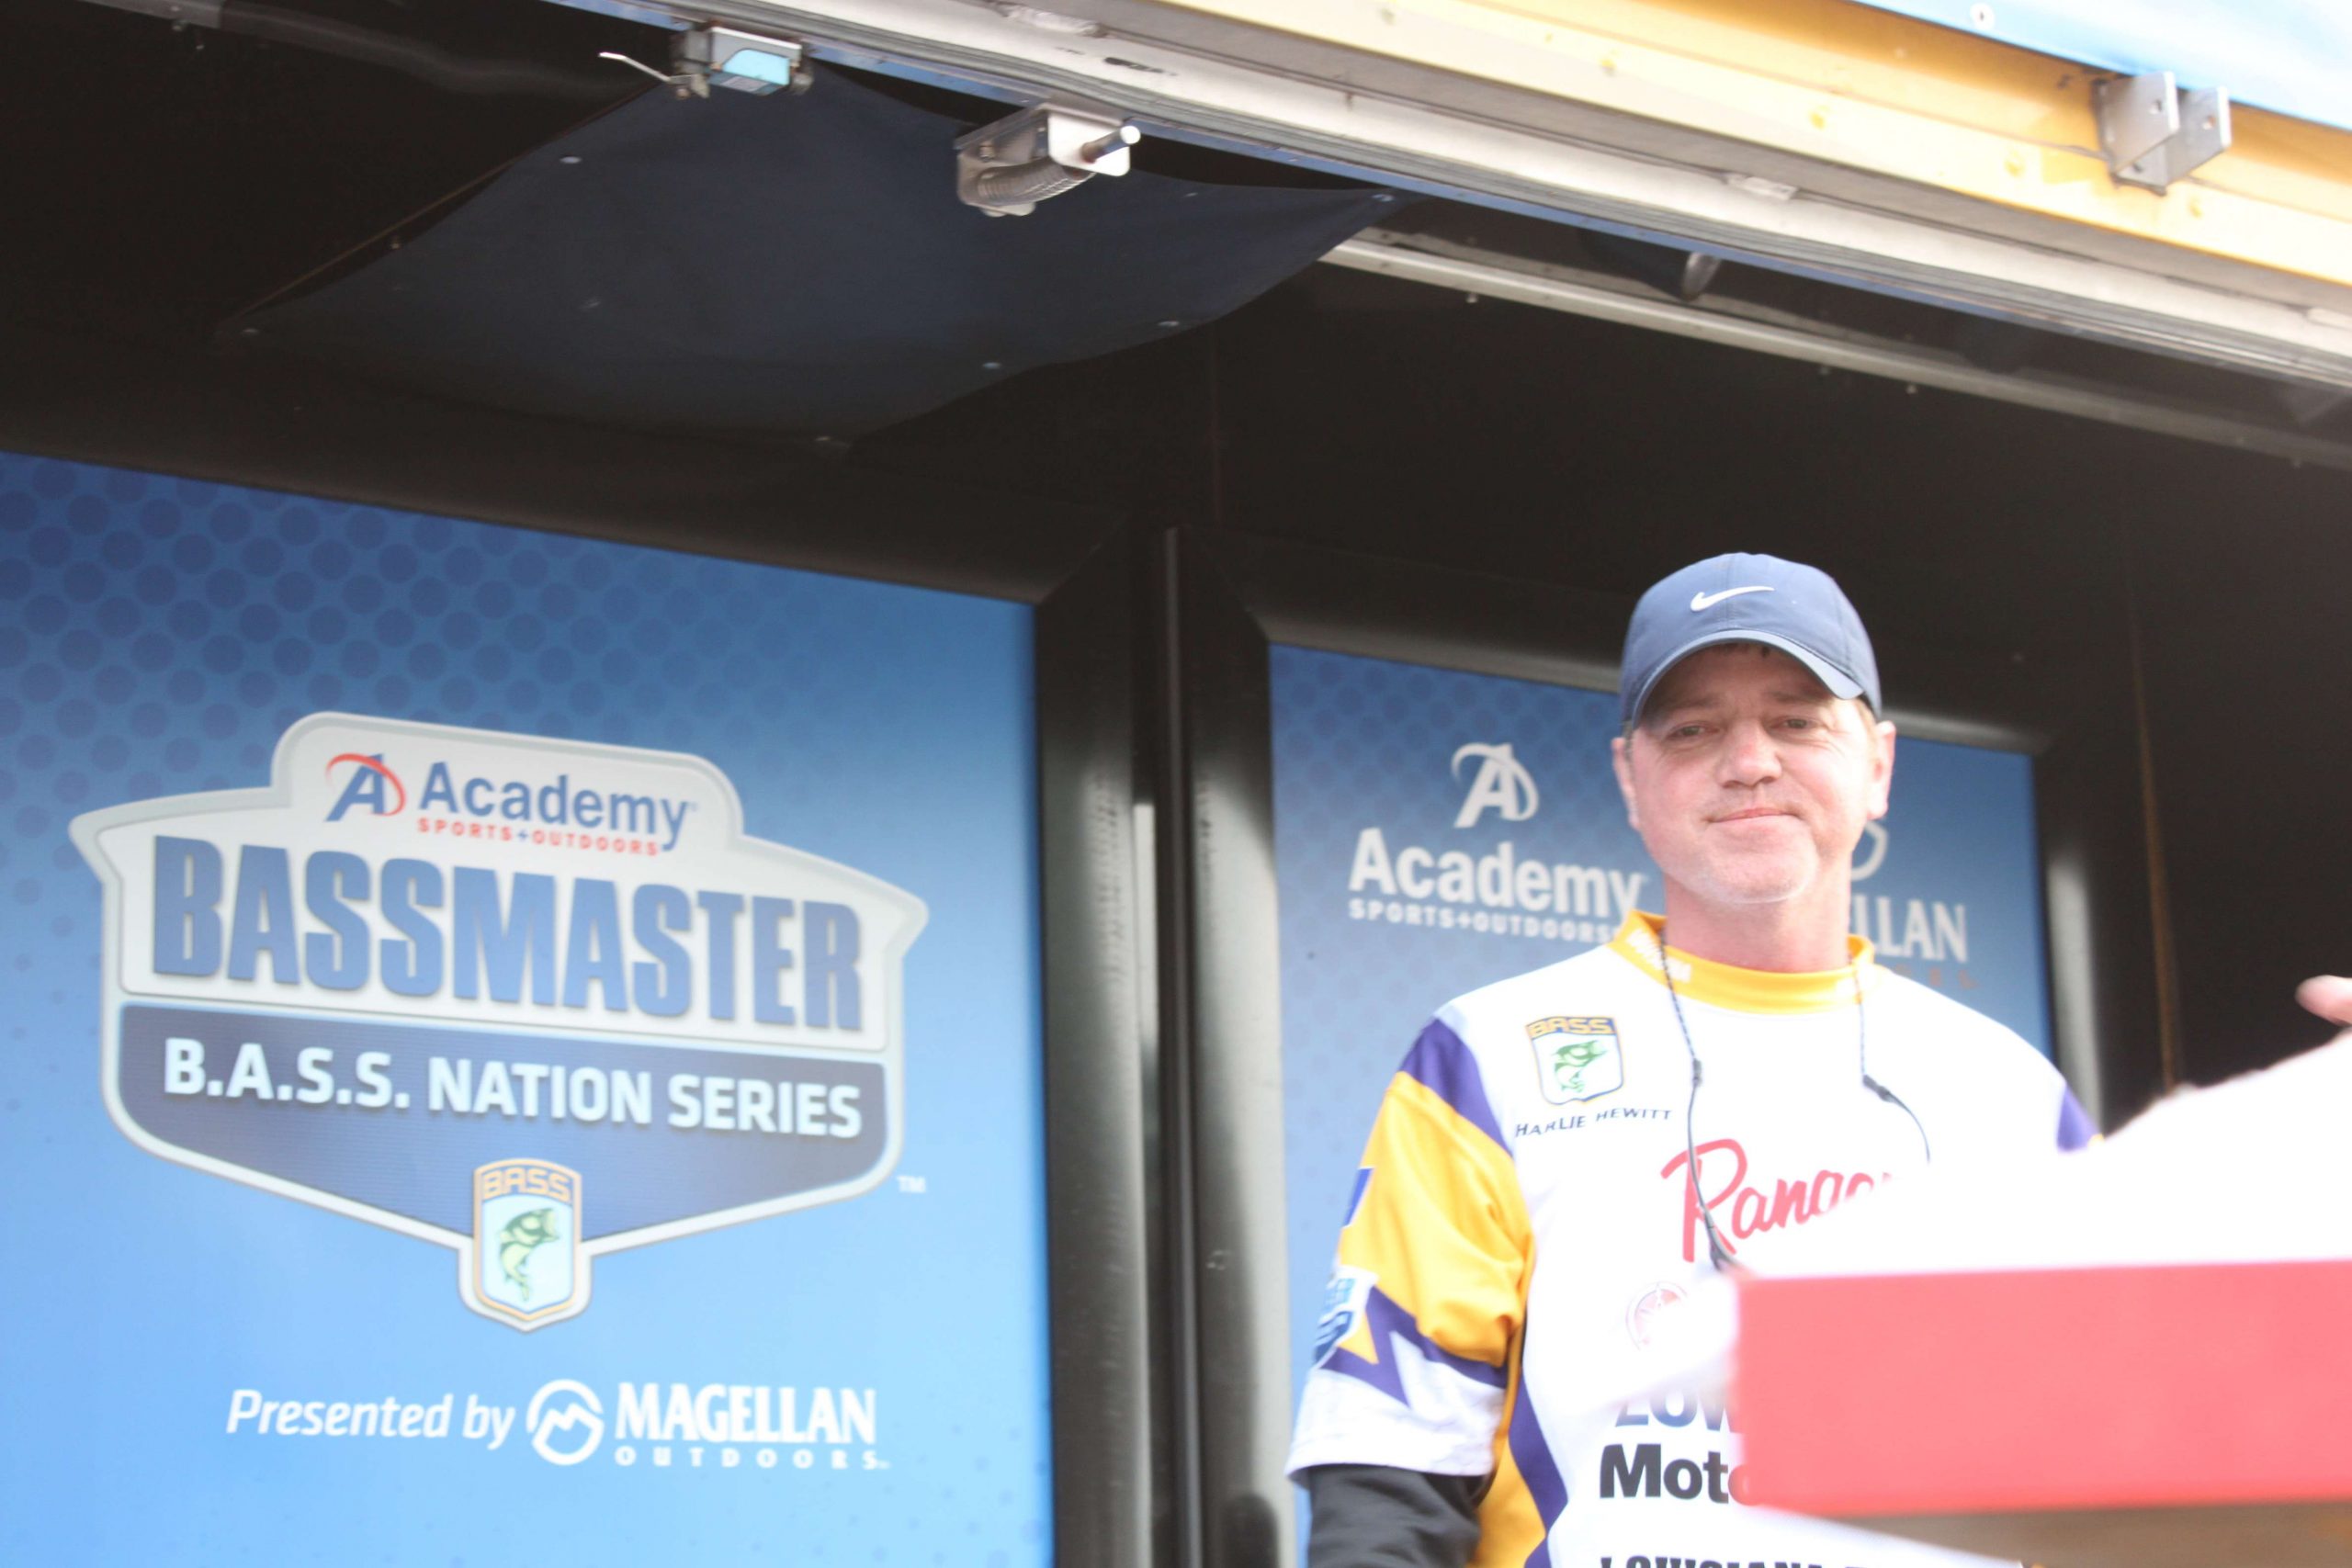 Hewitt had a fine tournament, but he only caught one bass on Friday. That dropped him to fourth place overall in the non-boater division with a three-day total of 28-14.